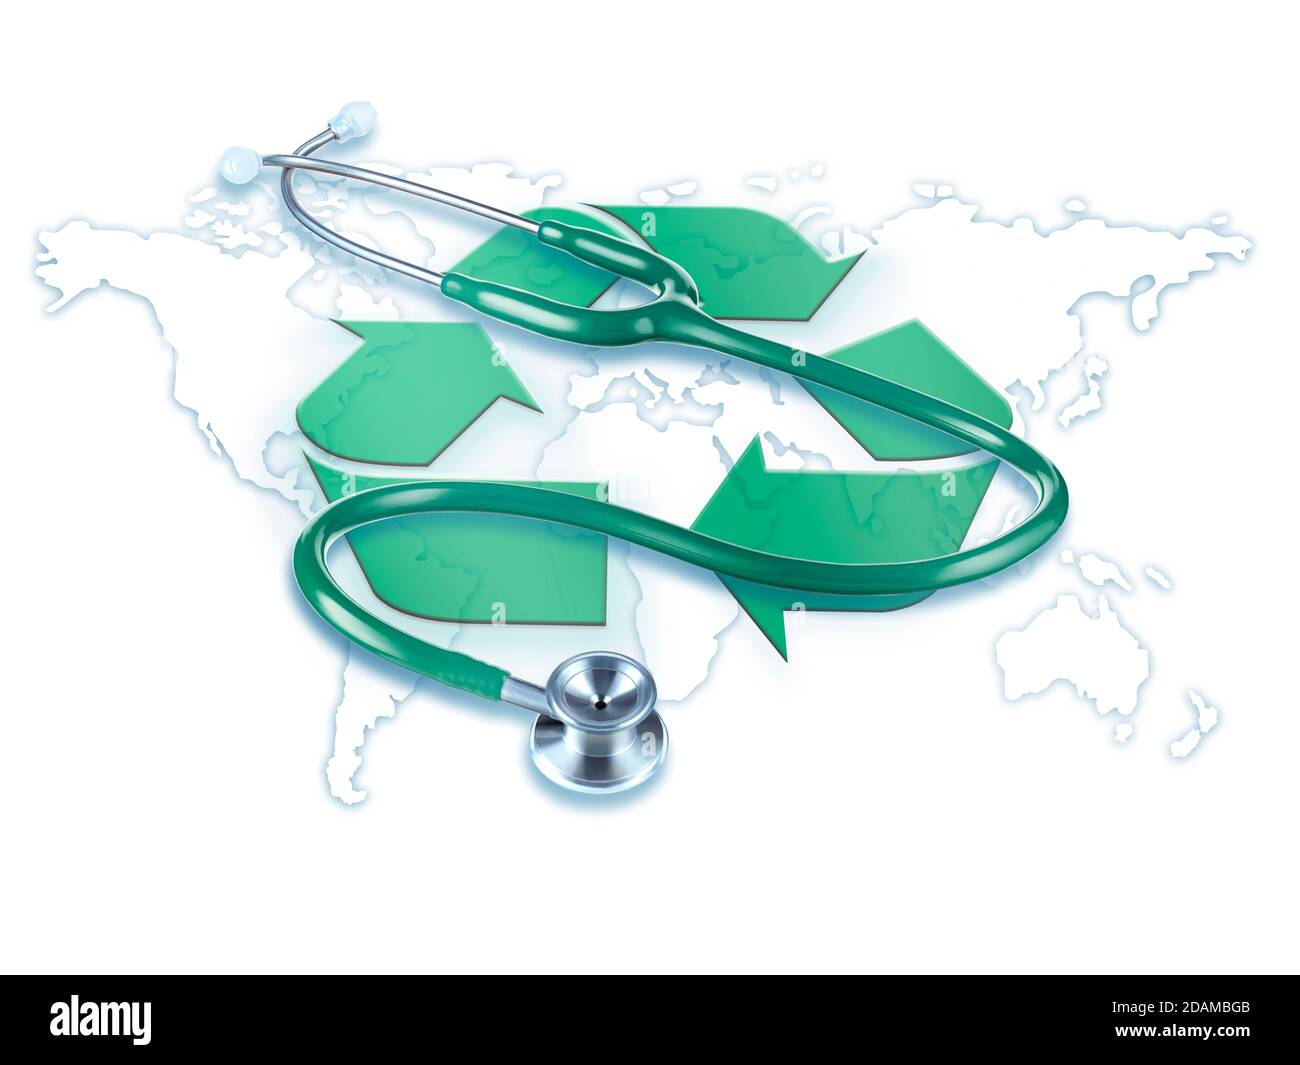 World map with recycling symbol and stethoscope, illustration. Stock Photo